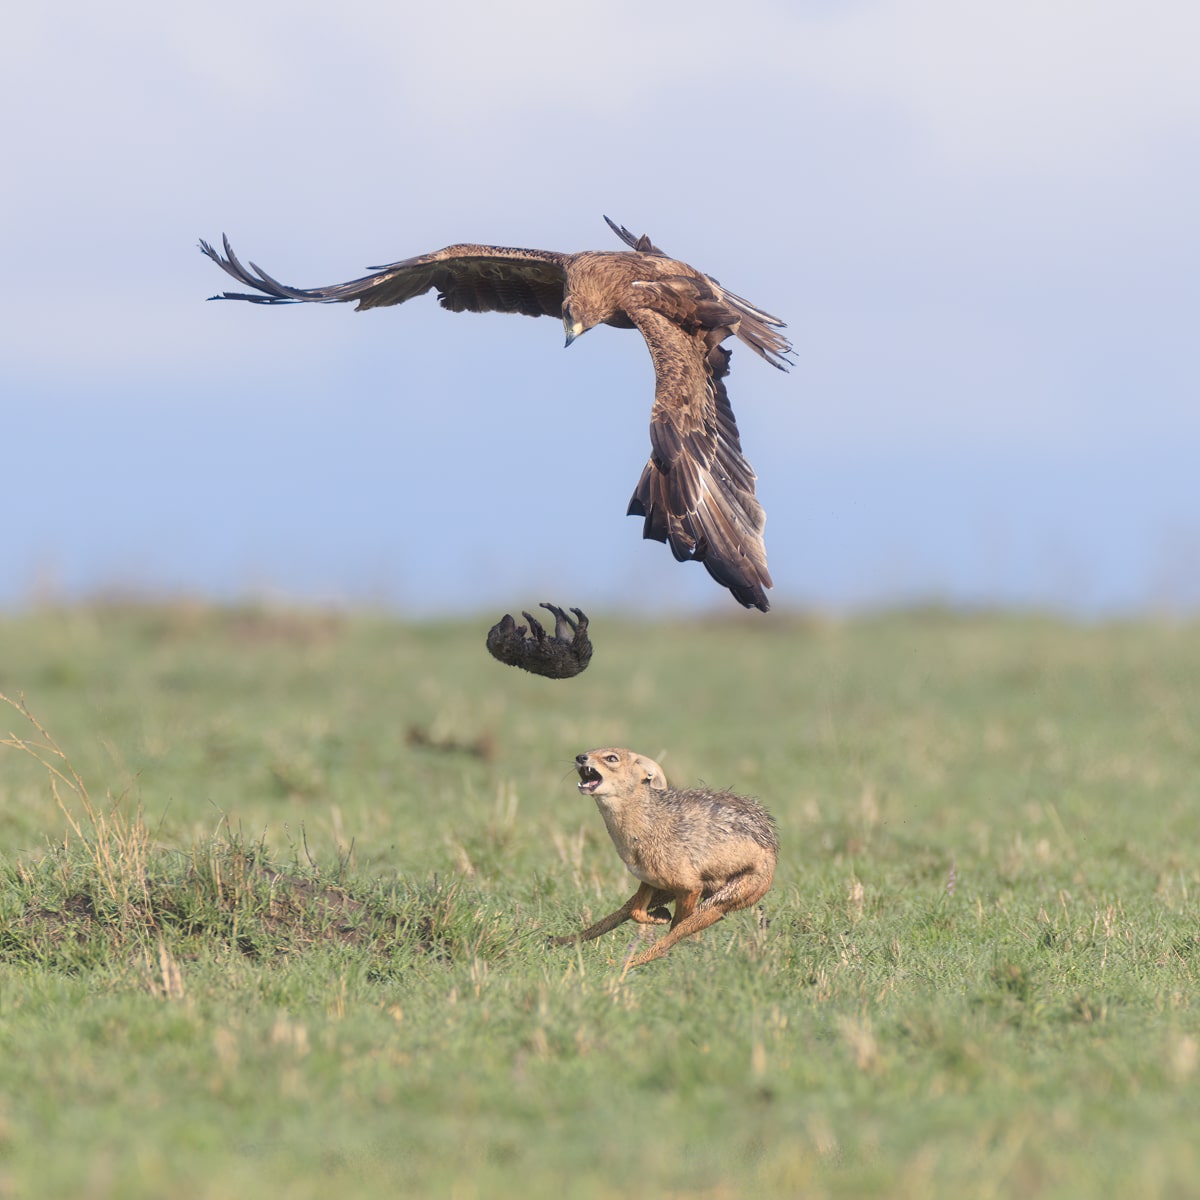 Jaw-Dropping Moment an Eagle Snatches a Cub from a Jackal